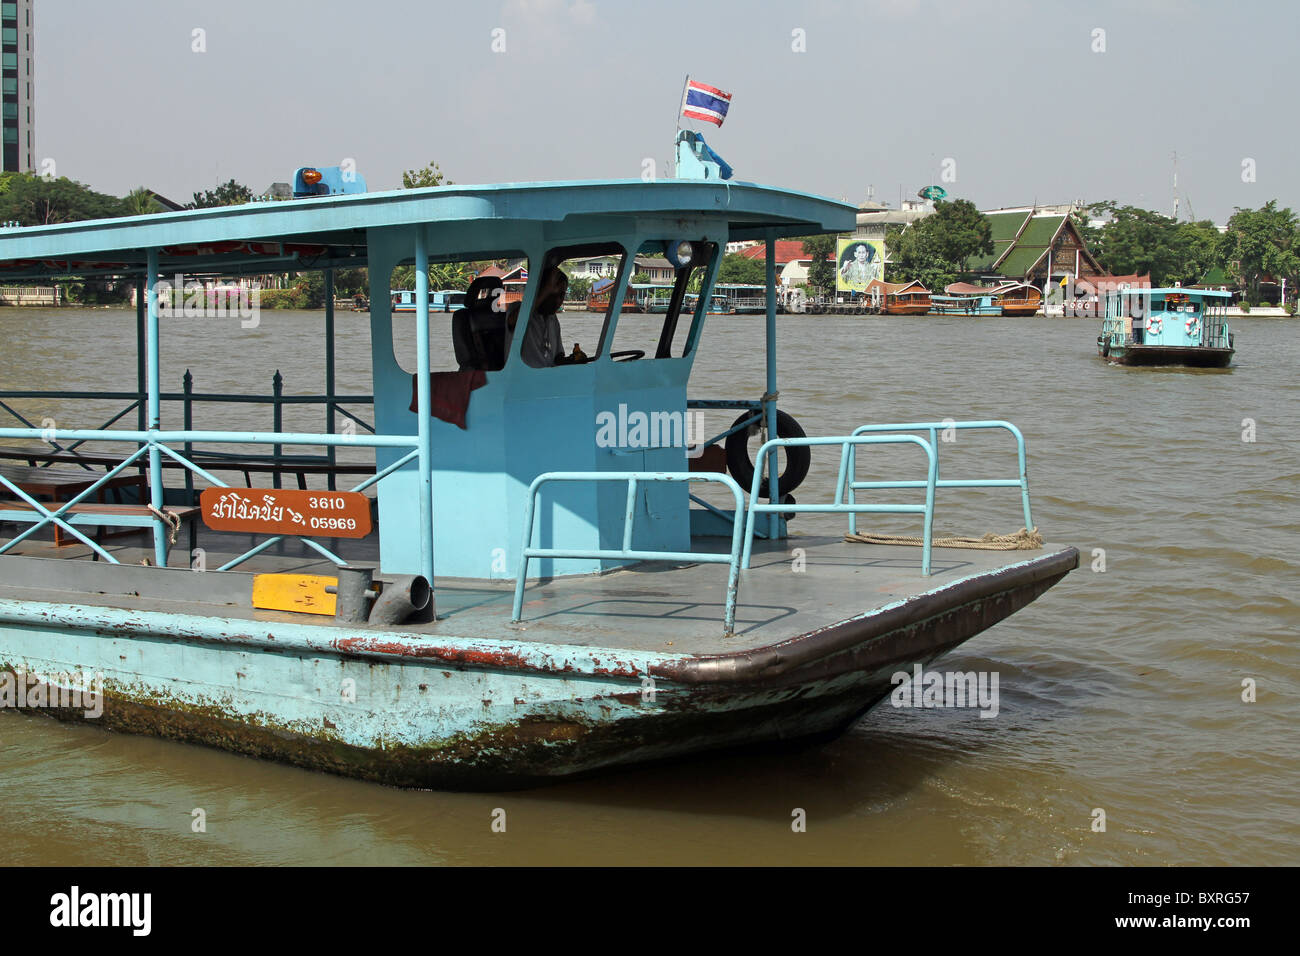 A traditional ferry boat on the Chao Phraya River in Bangkok, Thailand Stock Photo